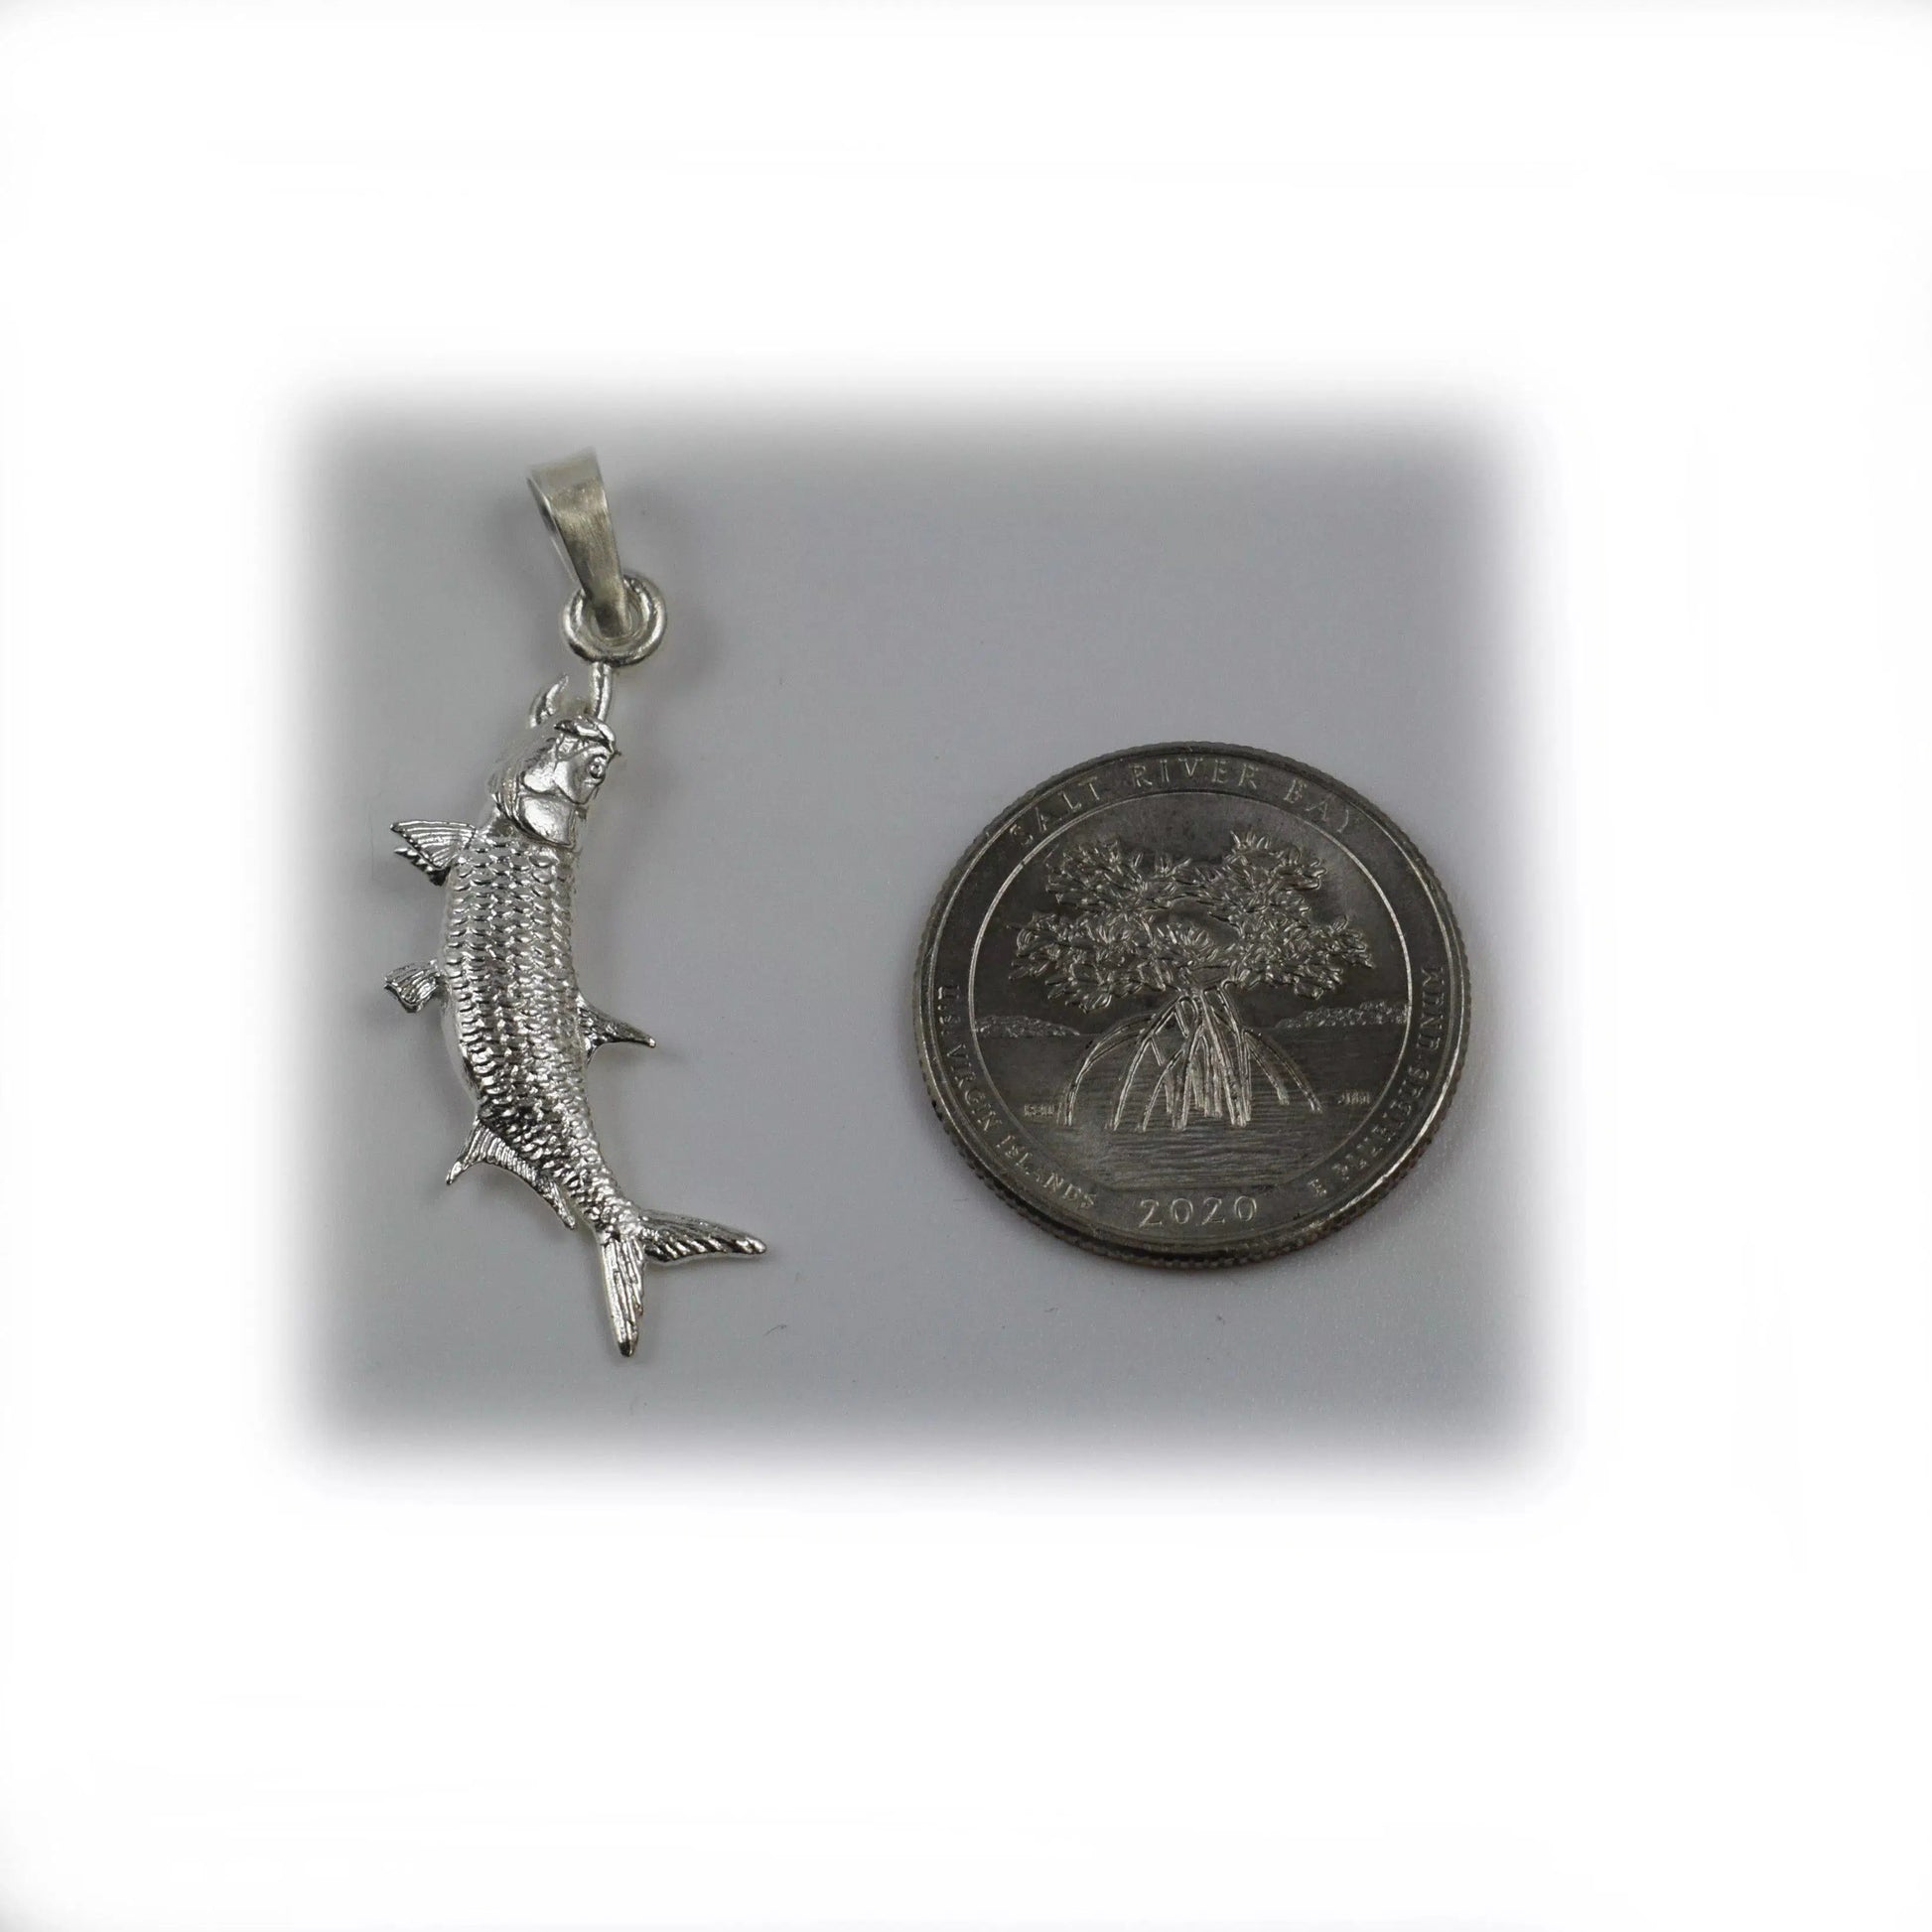 Tarpon hanging vertical by hook Pendant - Small